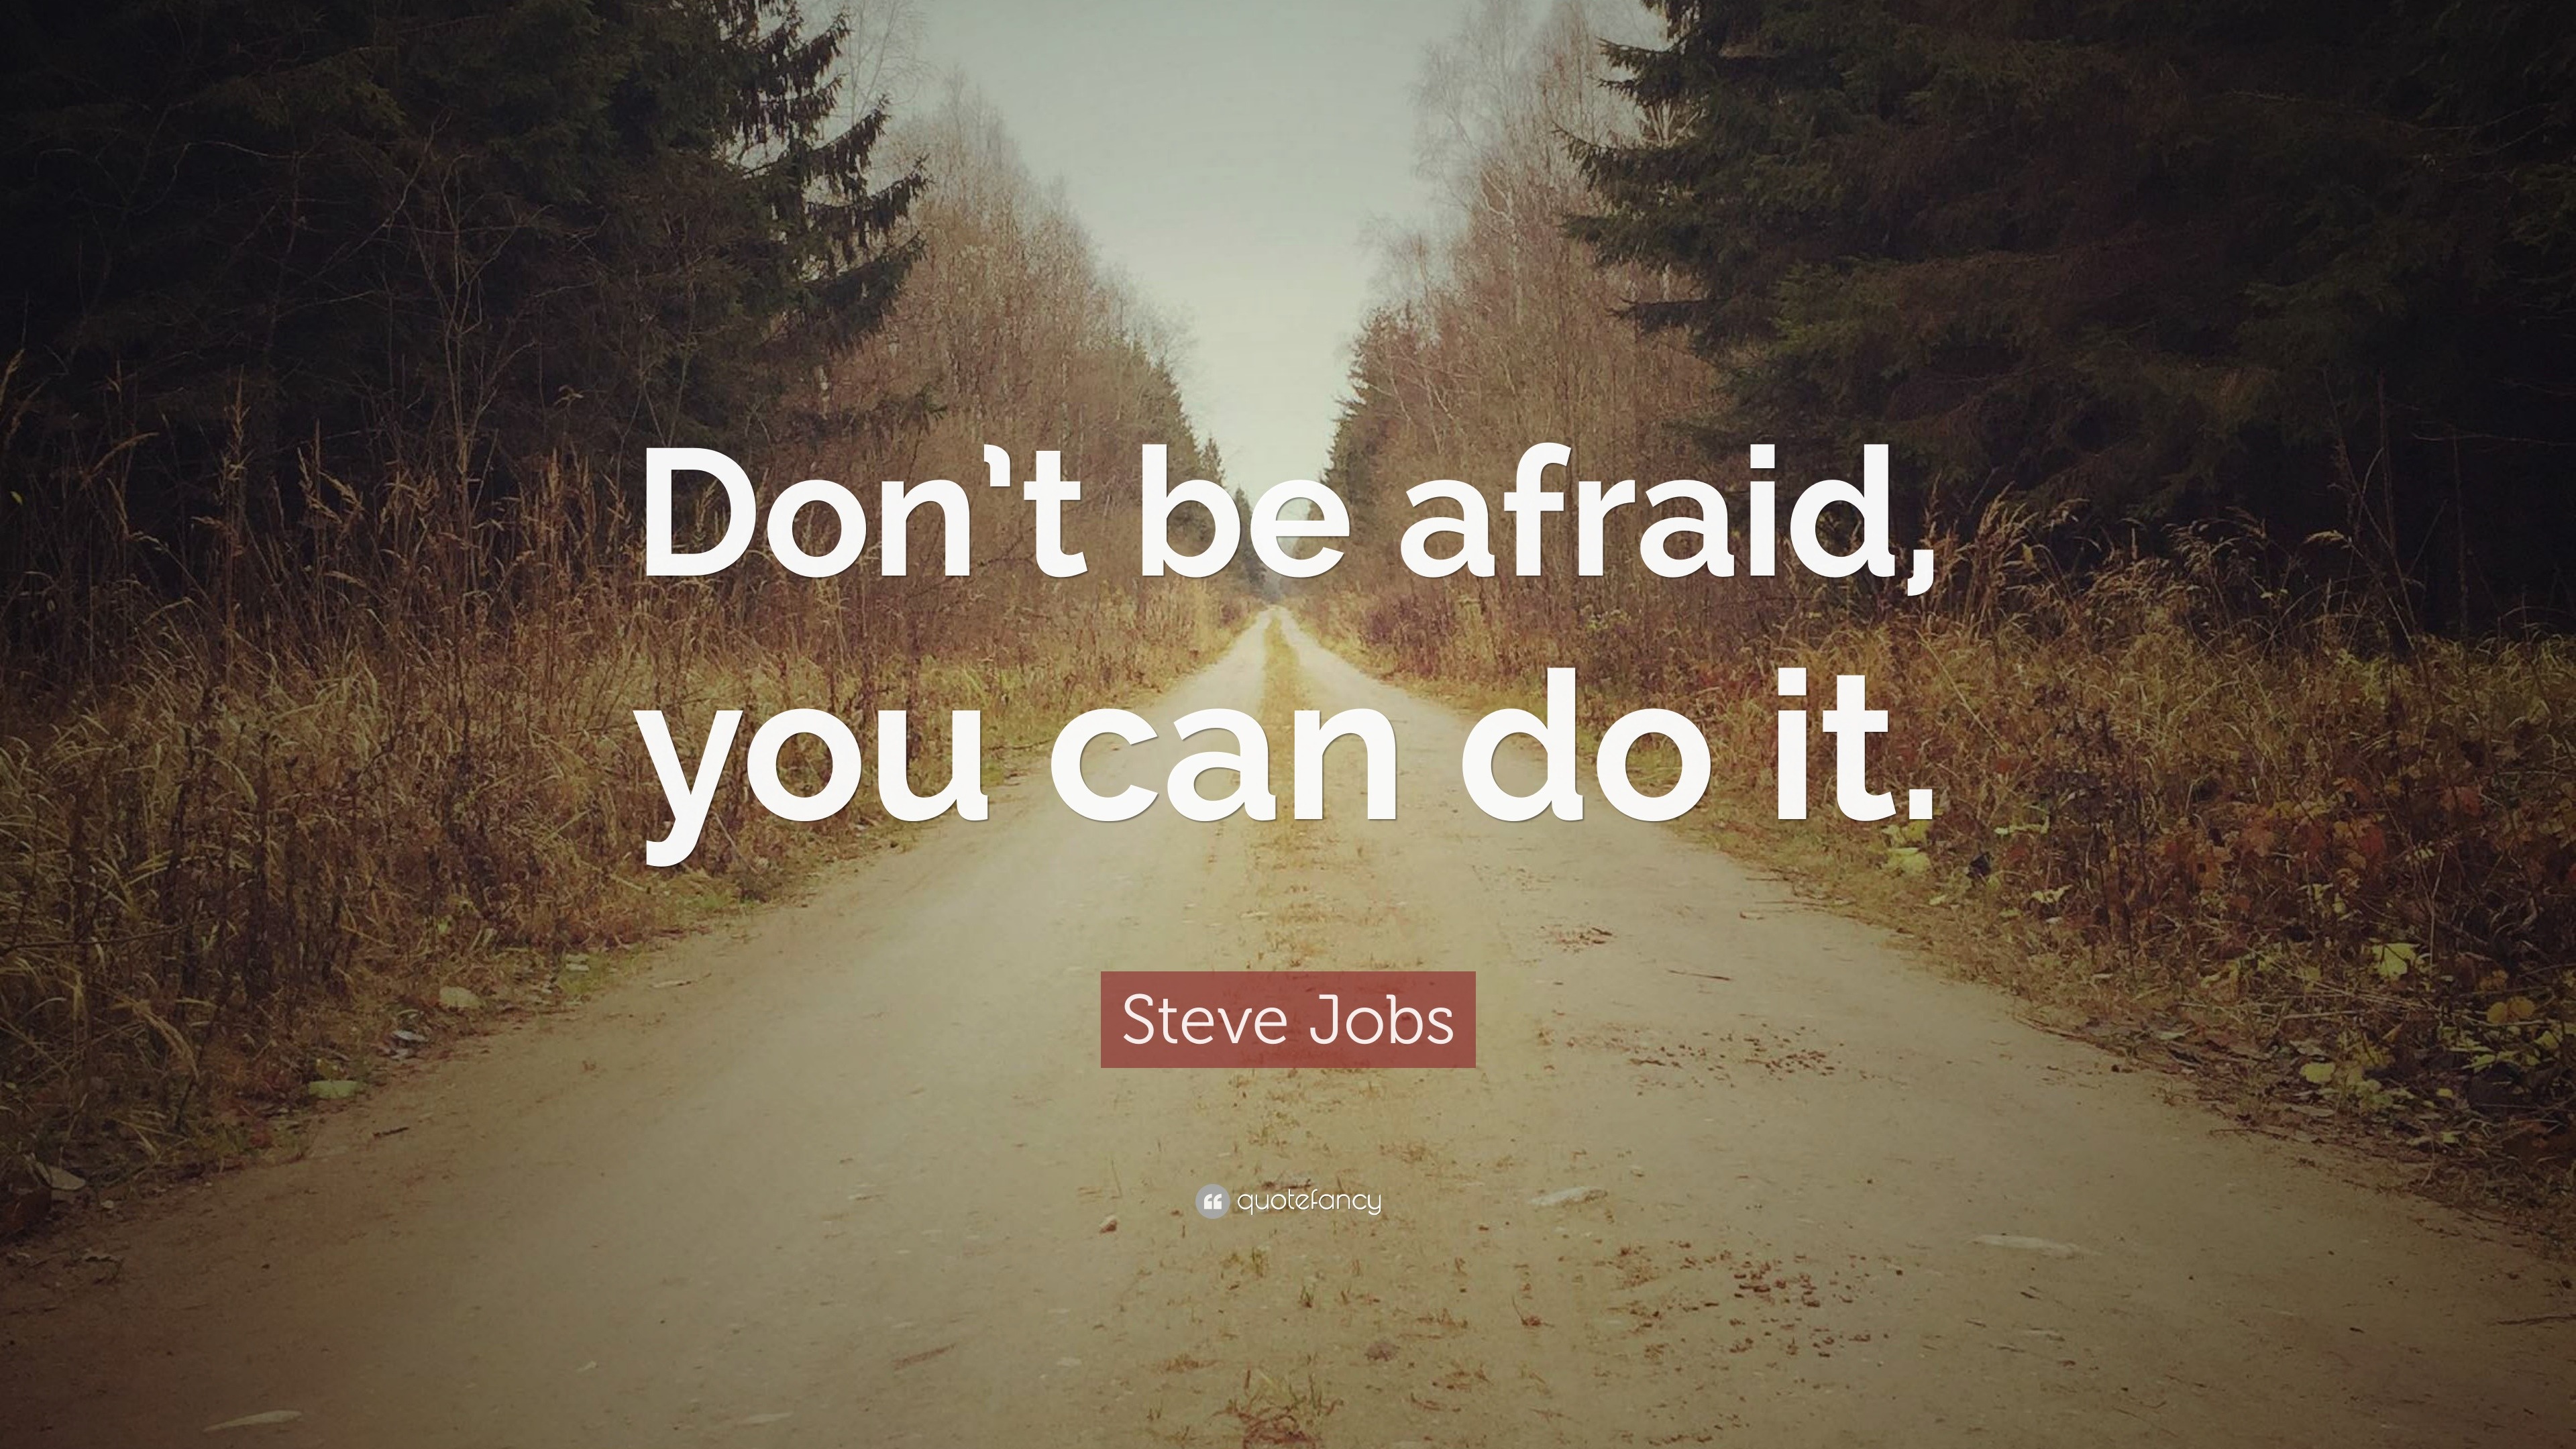 Steve Jobs Quote “Don’t be afraid, you can do it.”